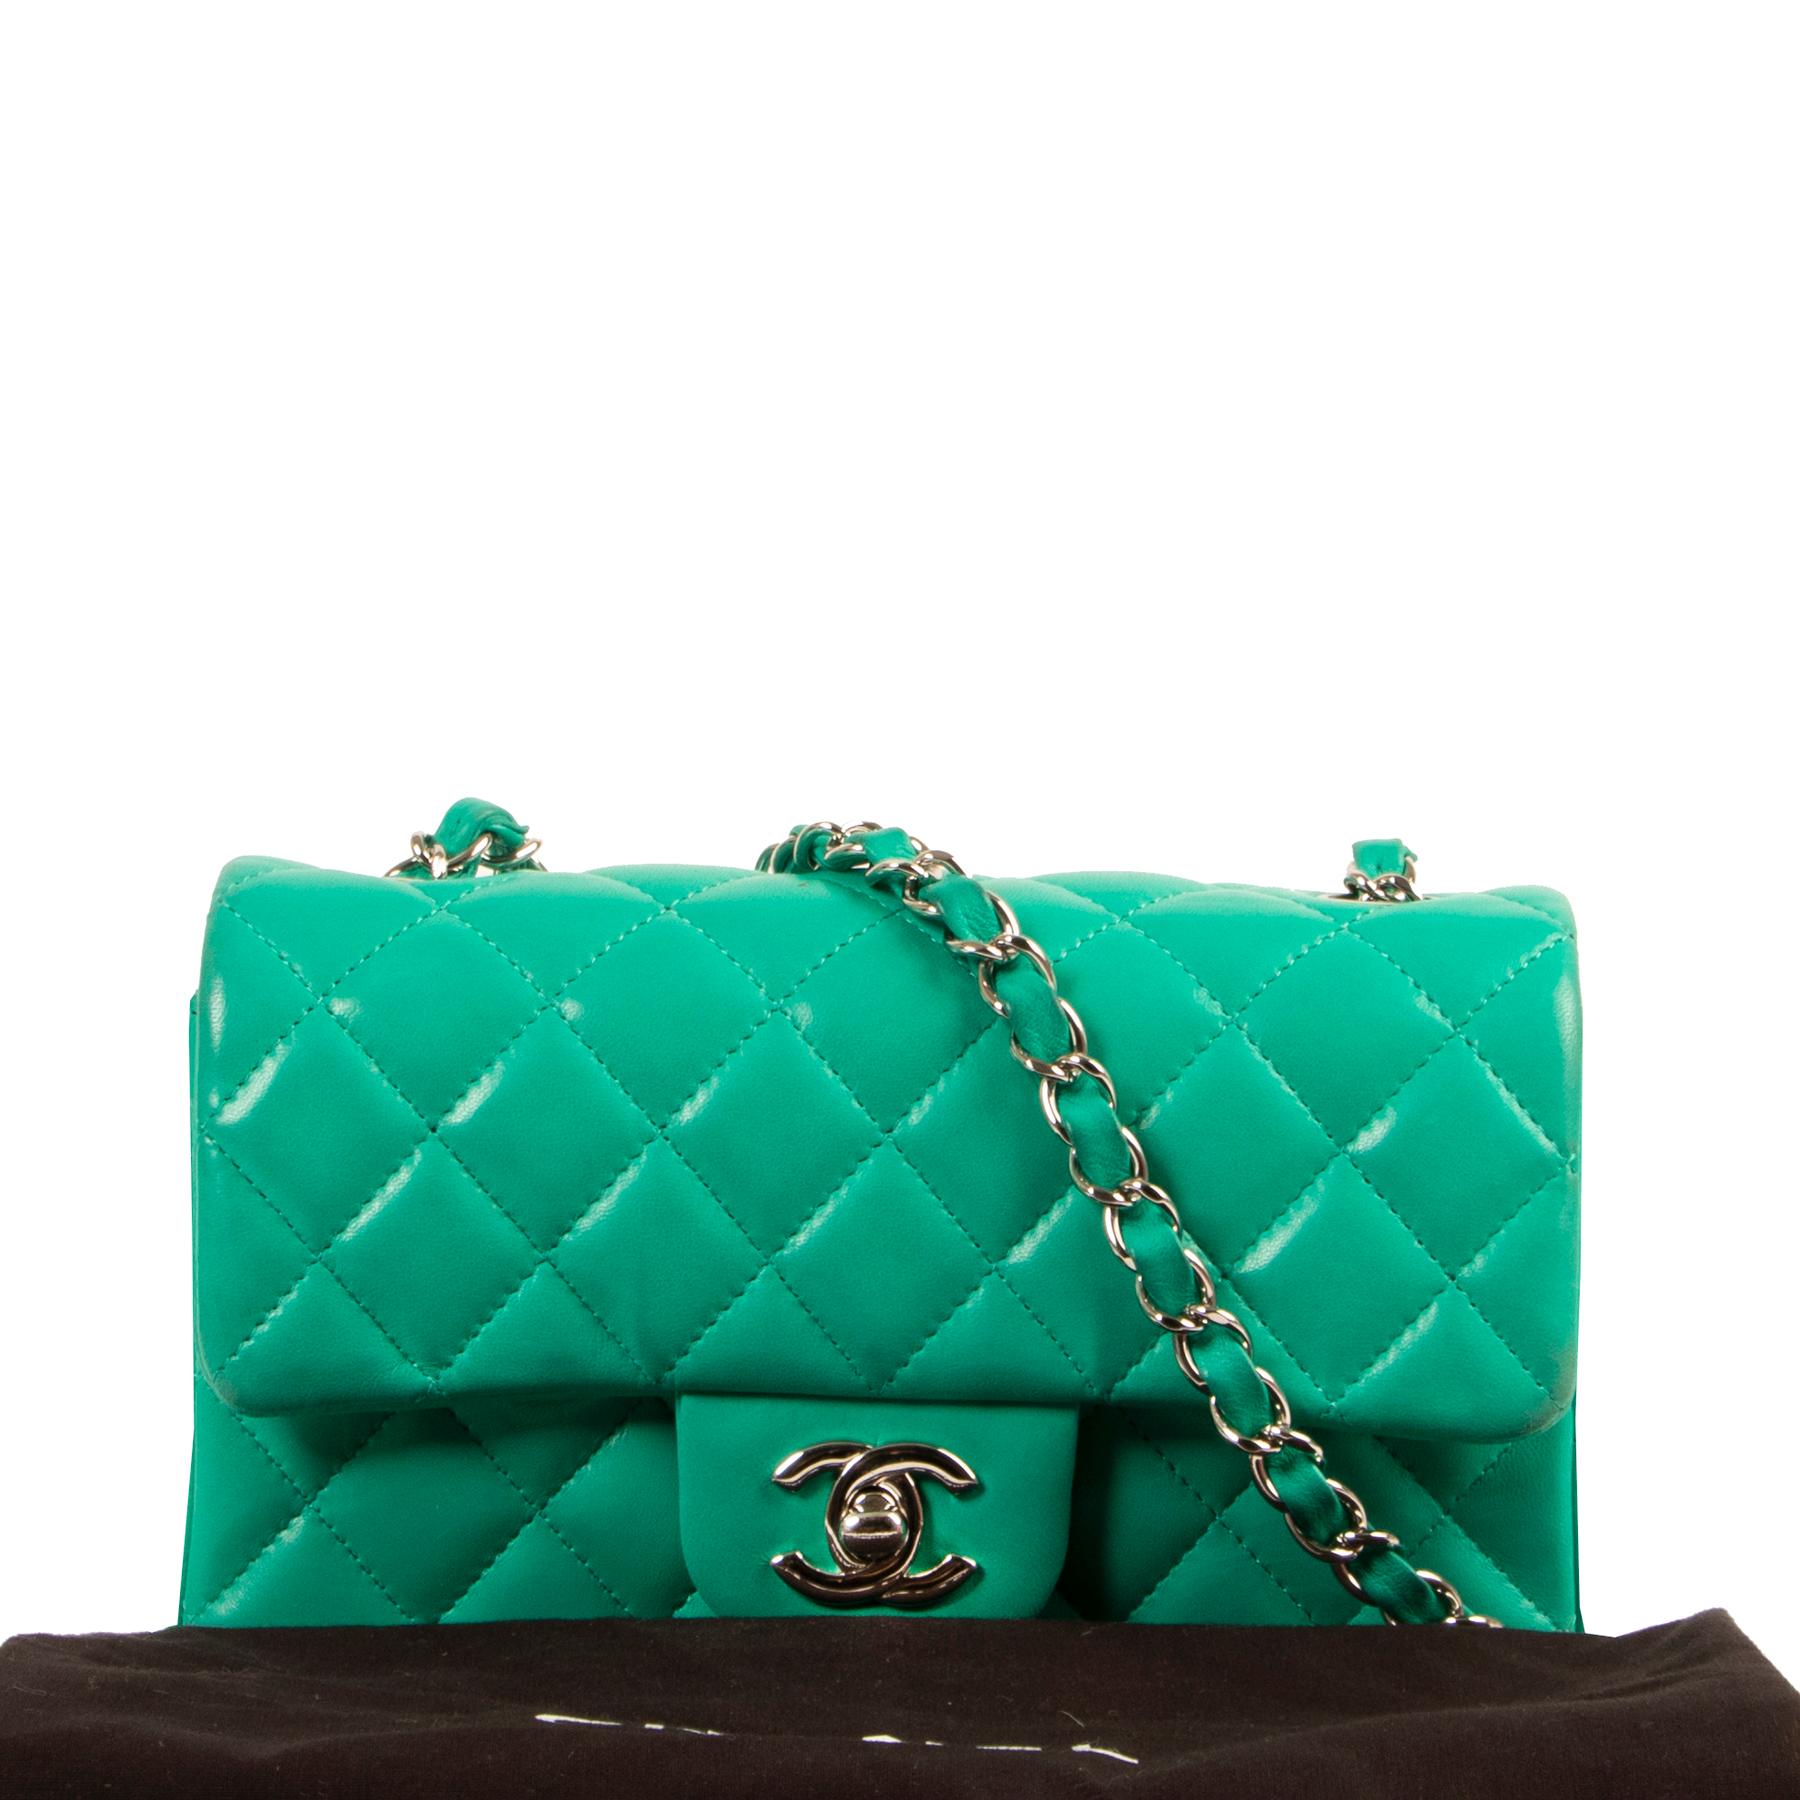 Chanel Green Quilted Lambskin Mini Classic Single Flap Bag

The others will be green with envy when you are carrying this arm candy. Chanel’s Classic Flap bag comes in a combination of buttery green lambskin with shiny silver-tone hardware.

This